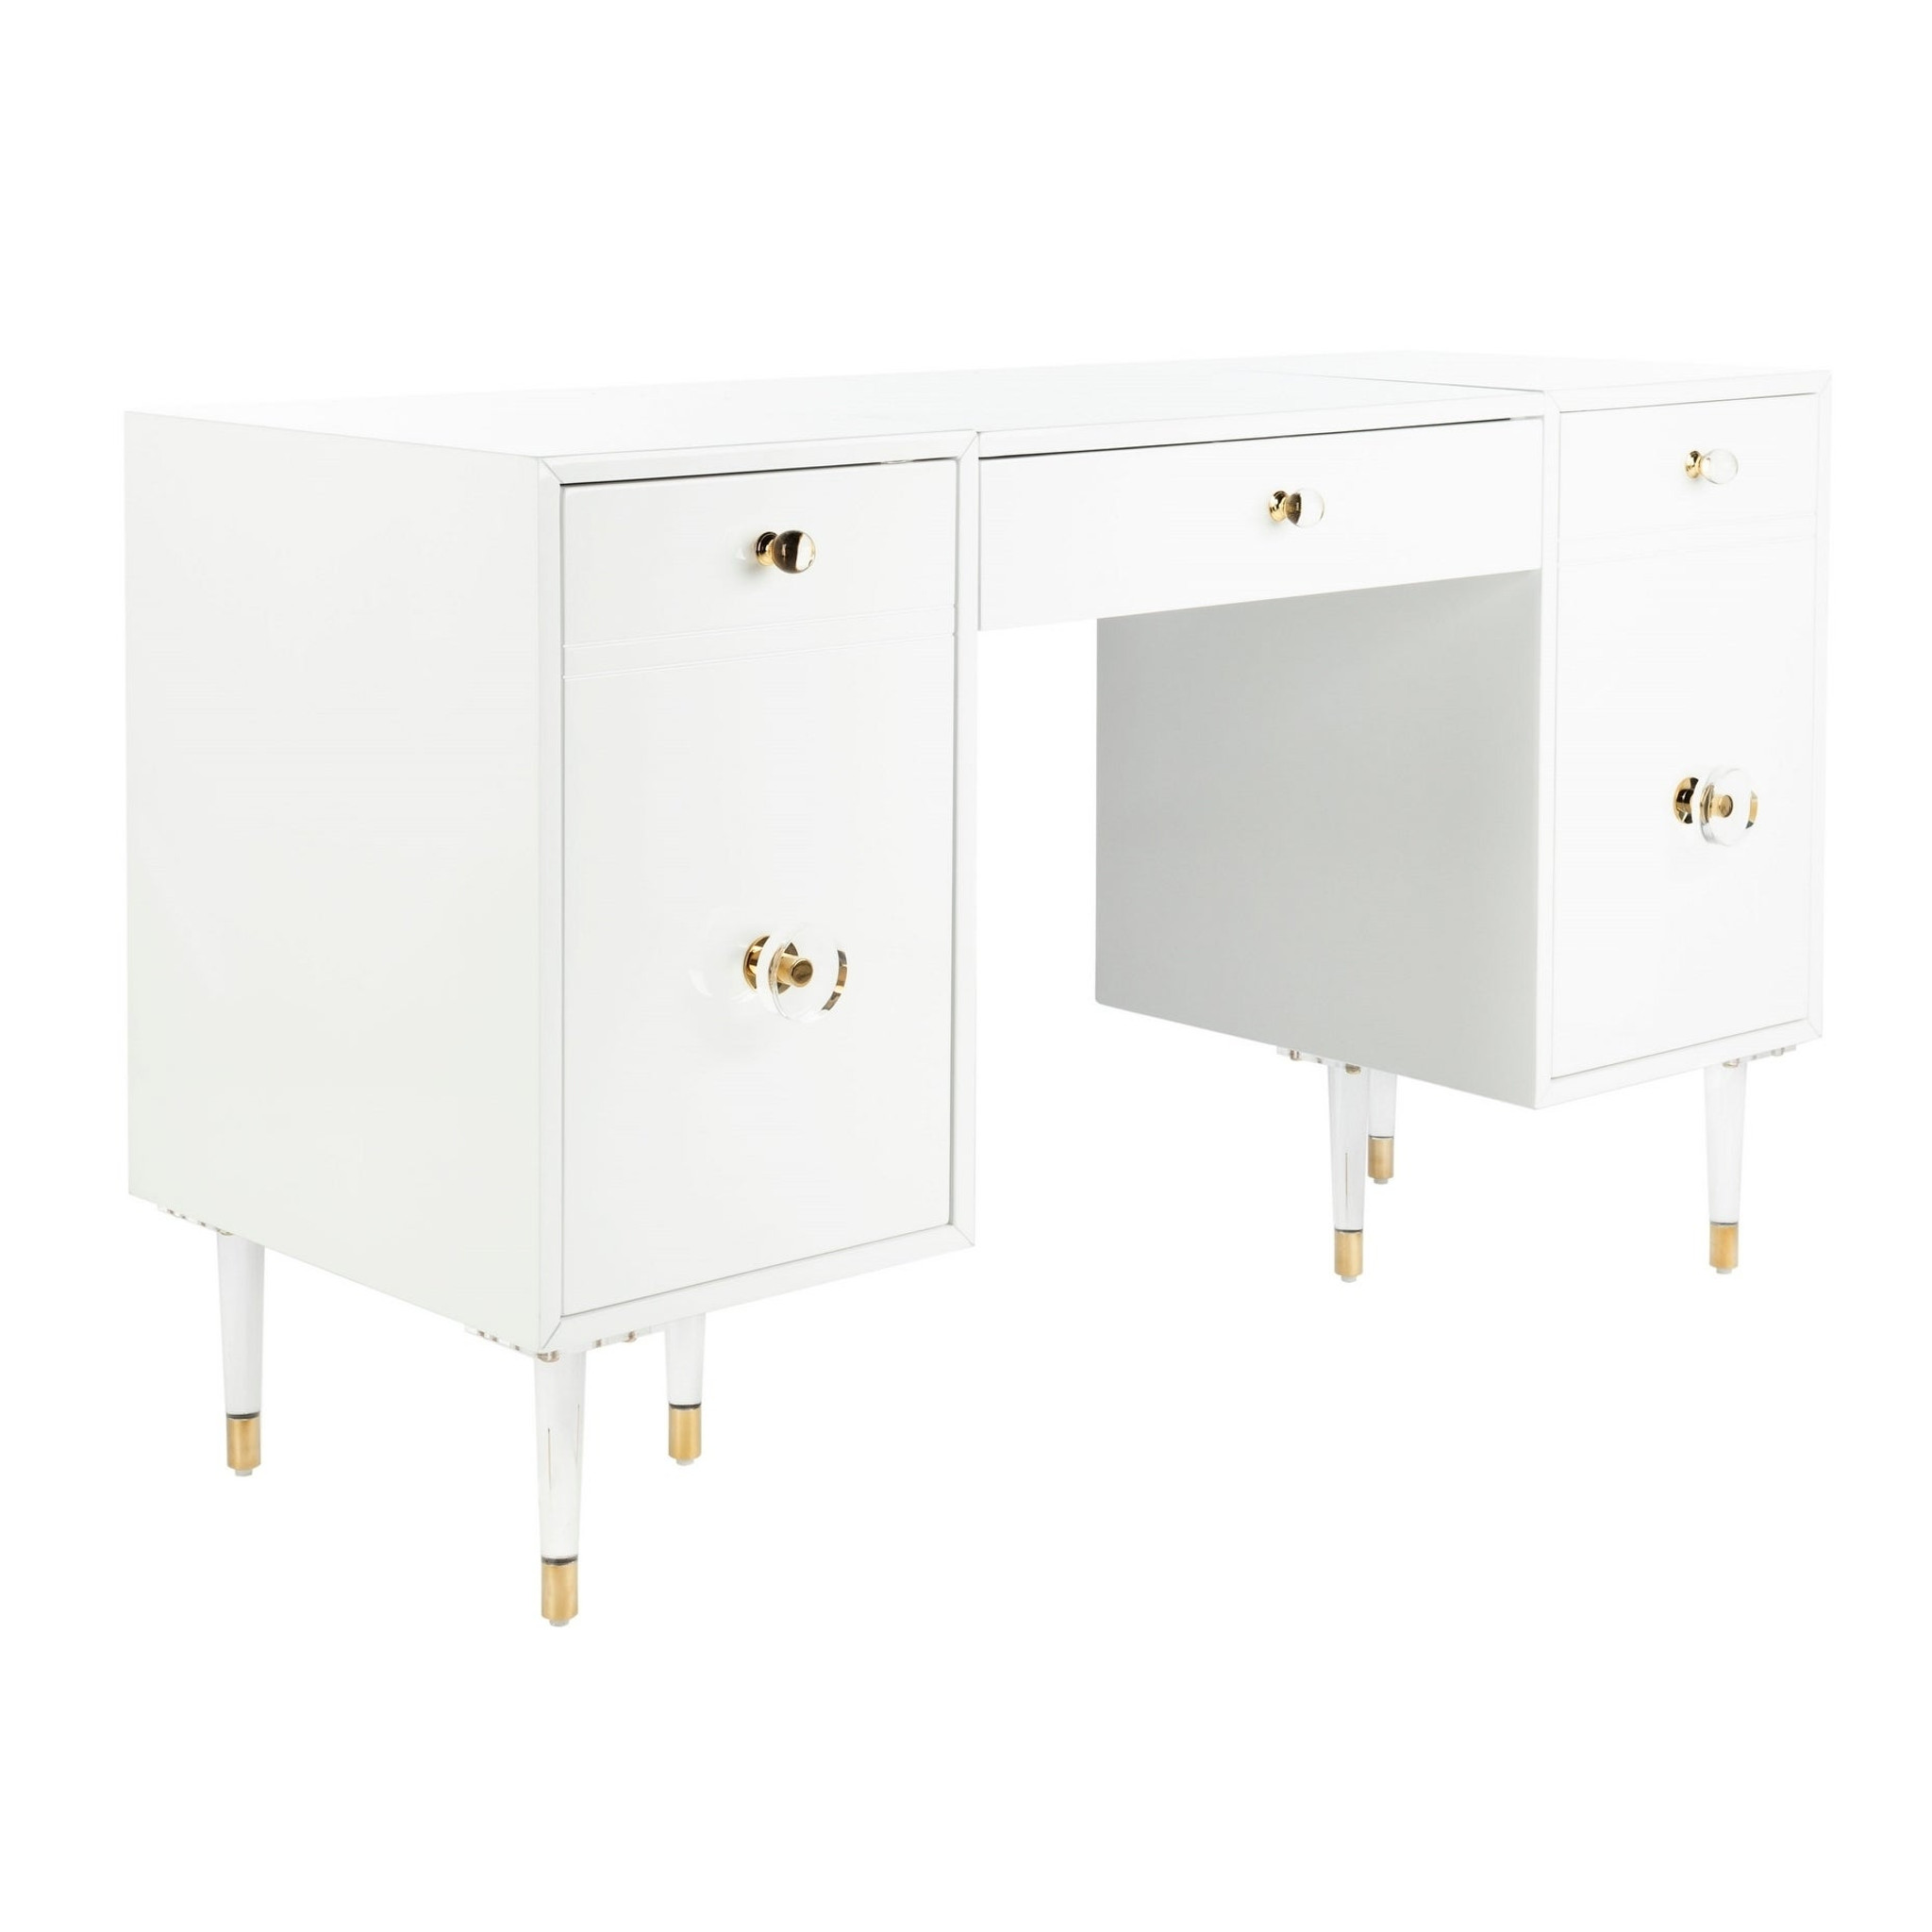 cheap Safavieh Joelle Acrylic Desk with white storage drawers lucite acrylic handles in stock